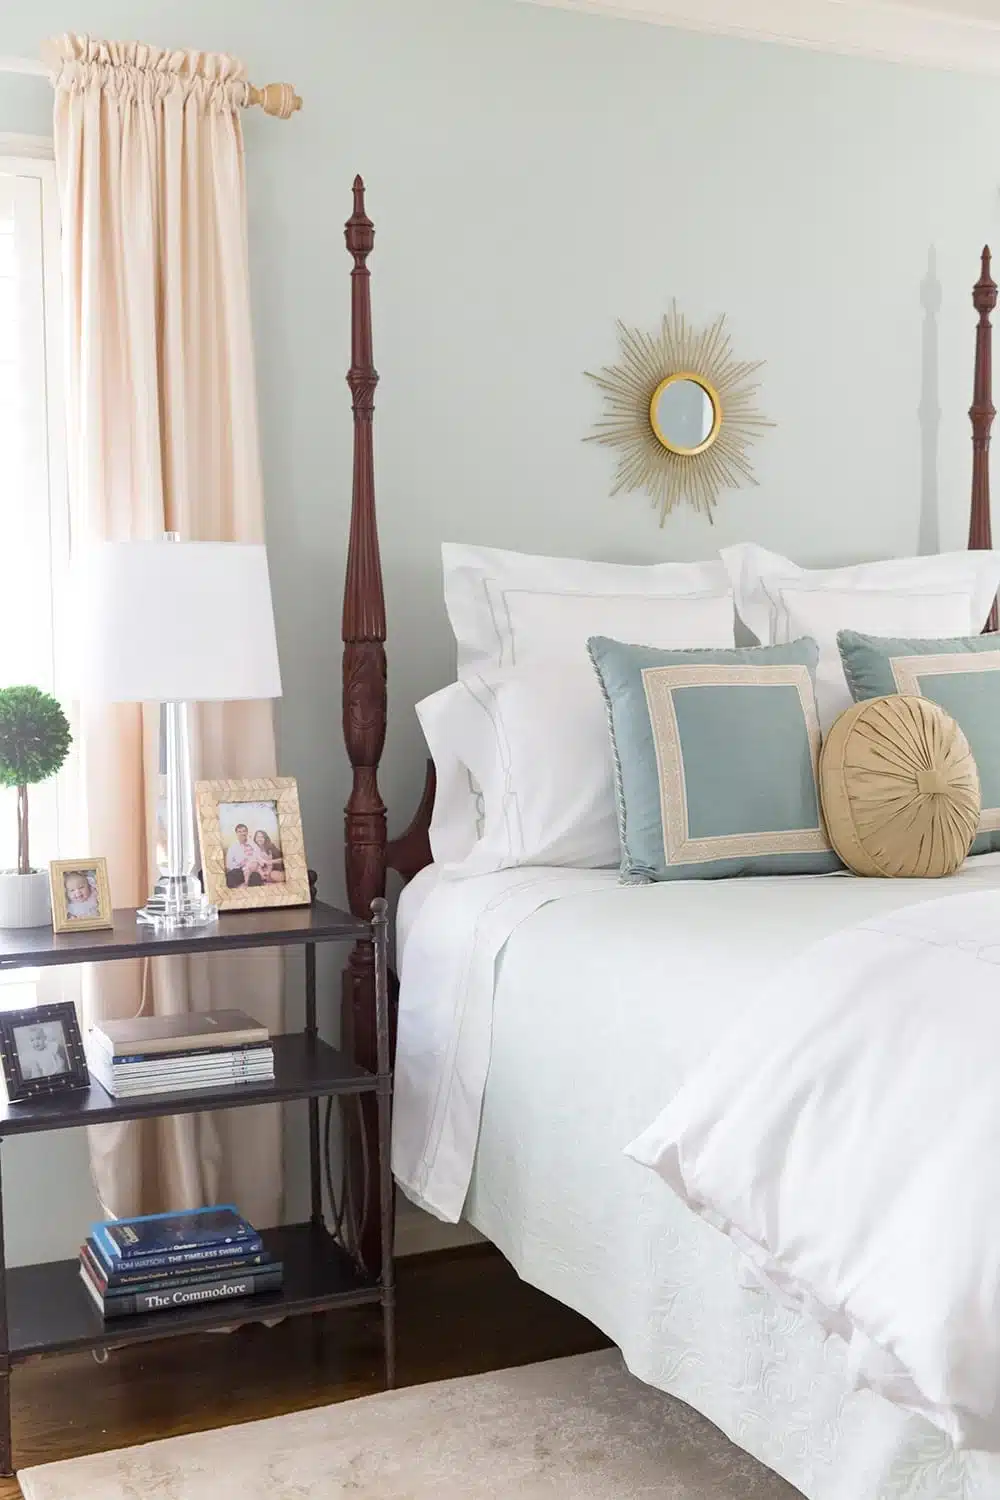 Sea Salt paint on the walls of bedroom with white linens on bed from Pizzazzerie blog.